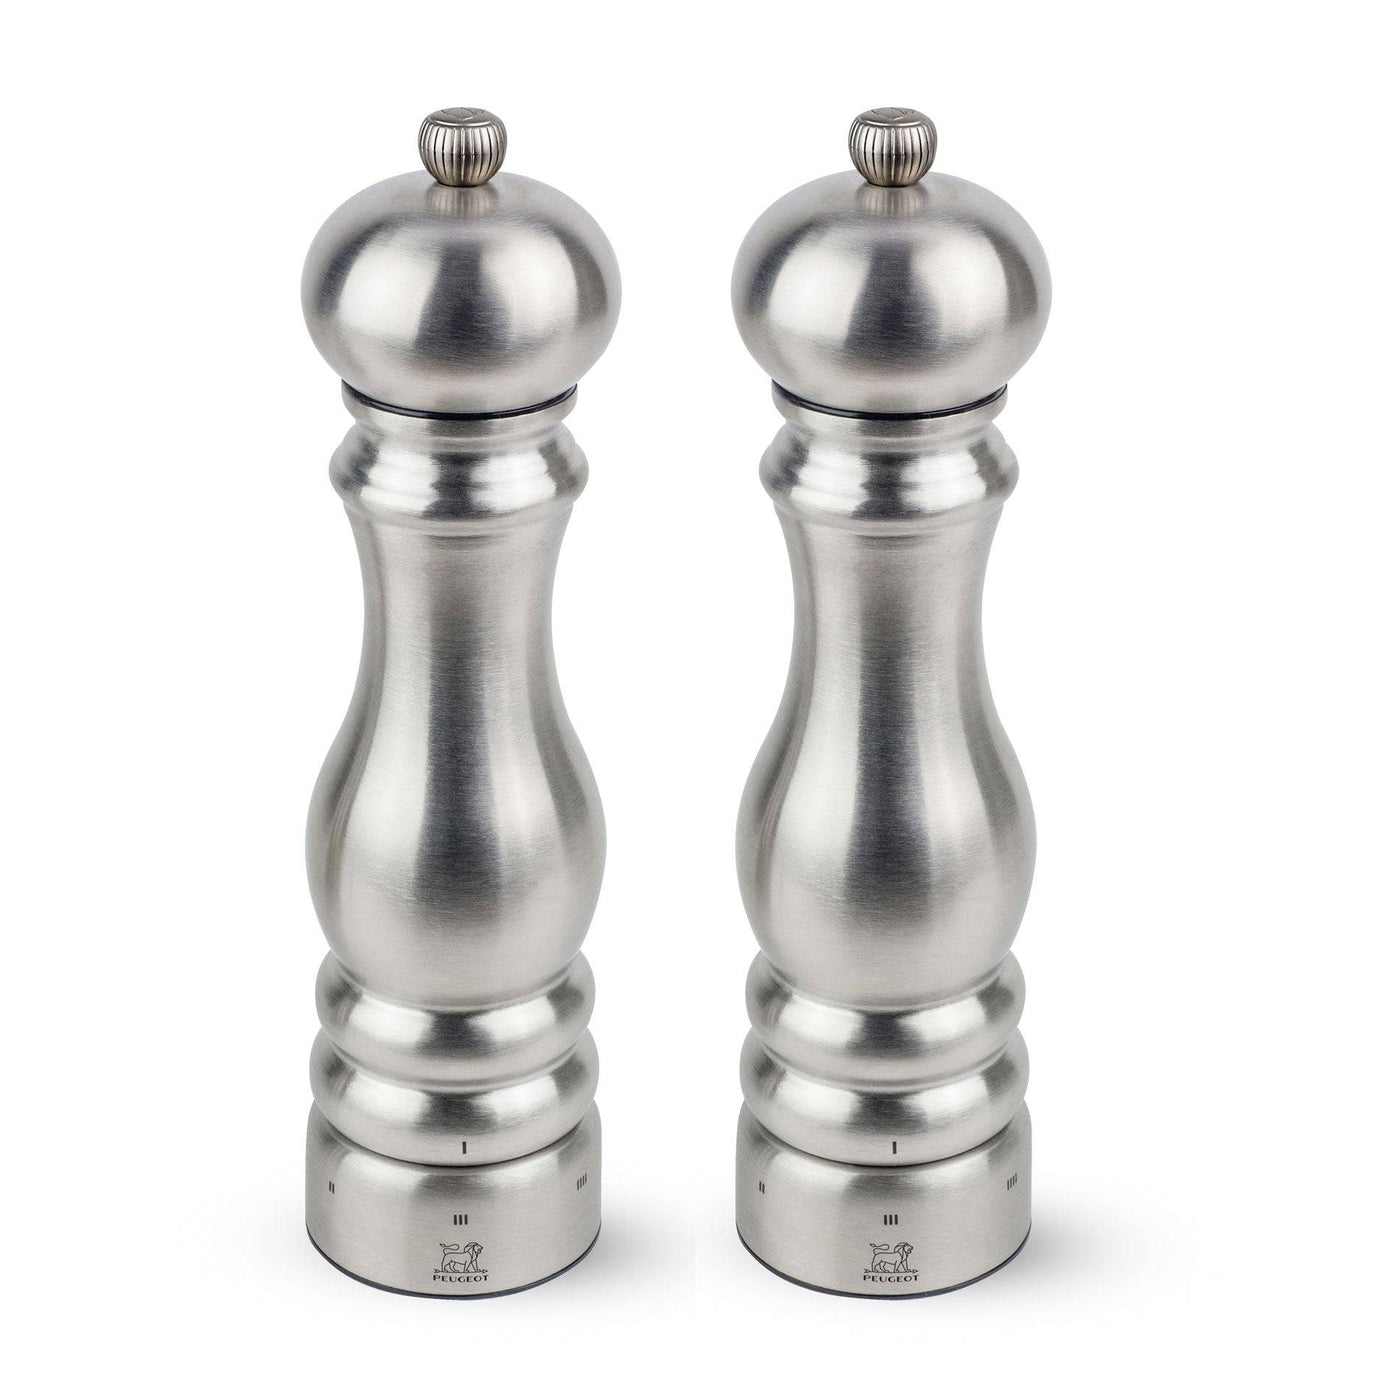 Peugeot Paris Chef u'Select Stainless Steel Pepper & Salt Mill Set, 9-in - Kitchen Universe